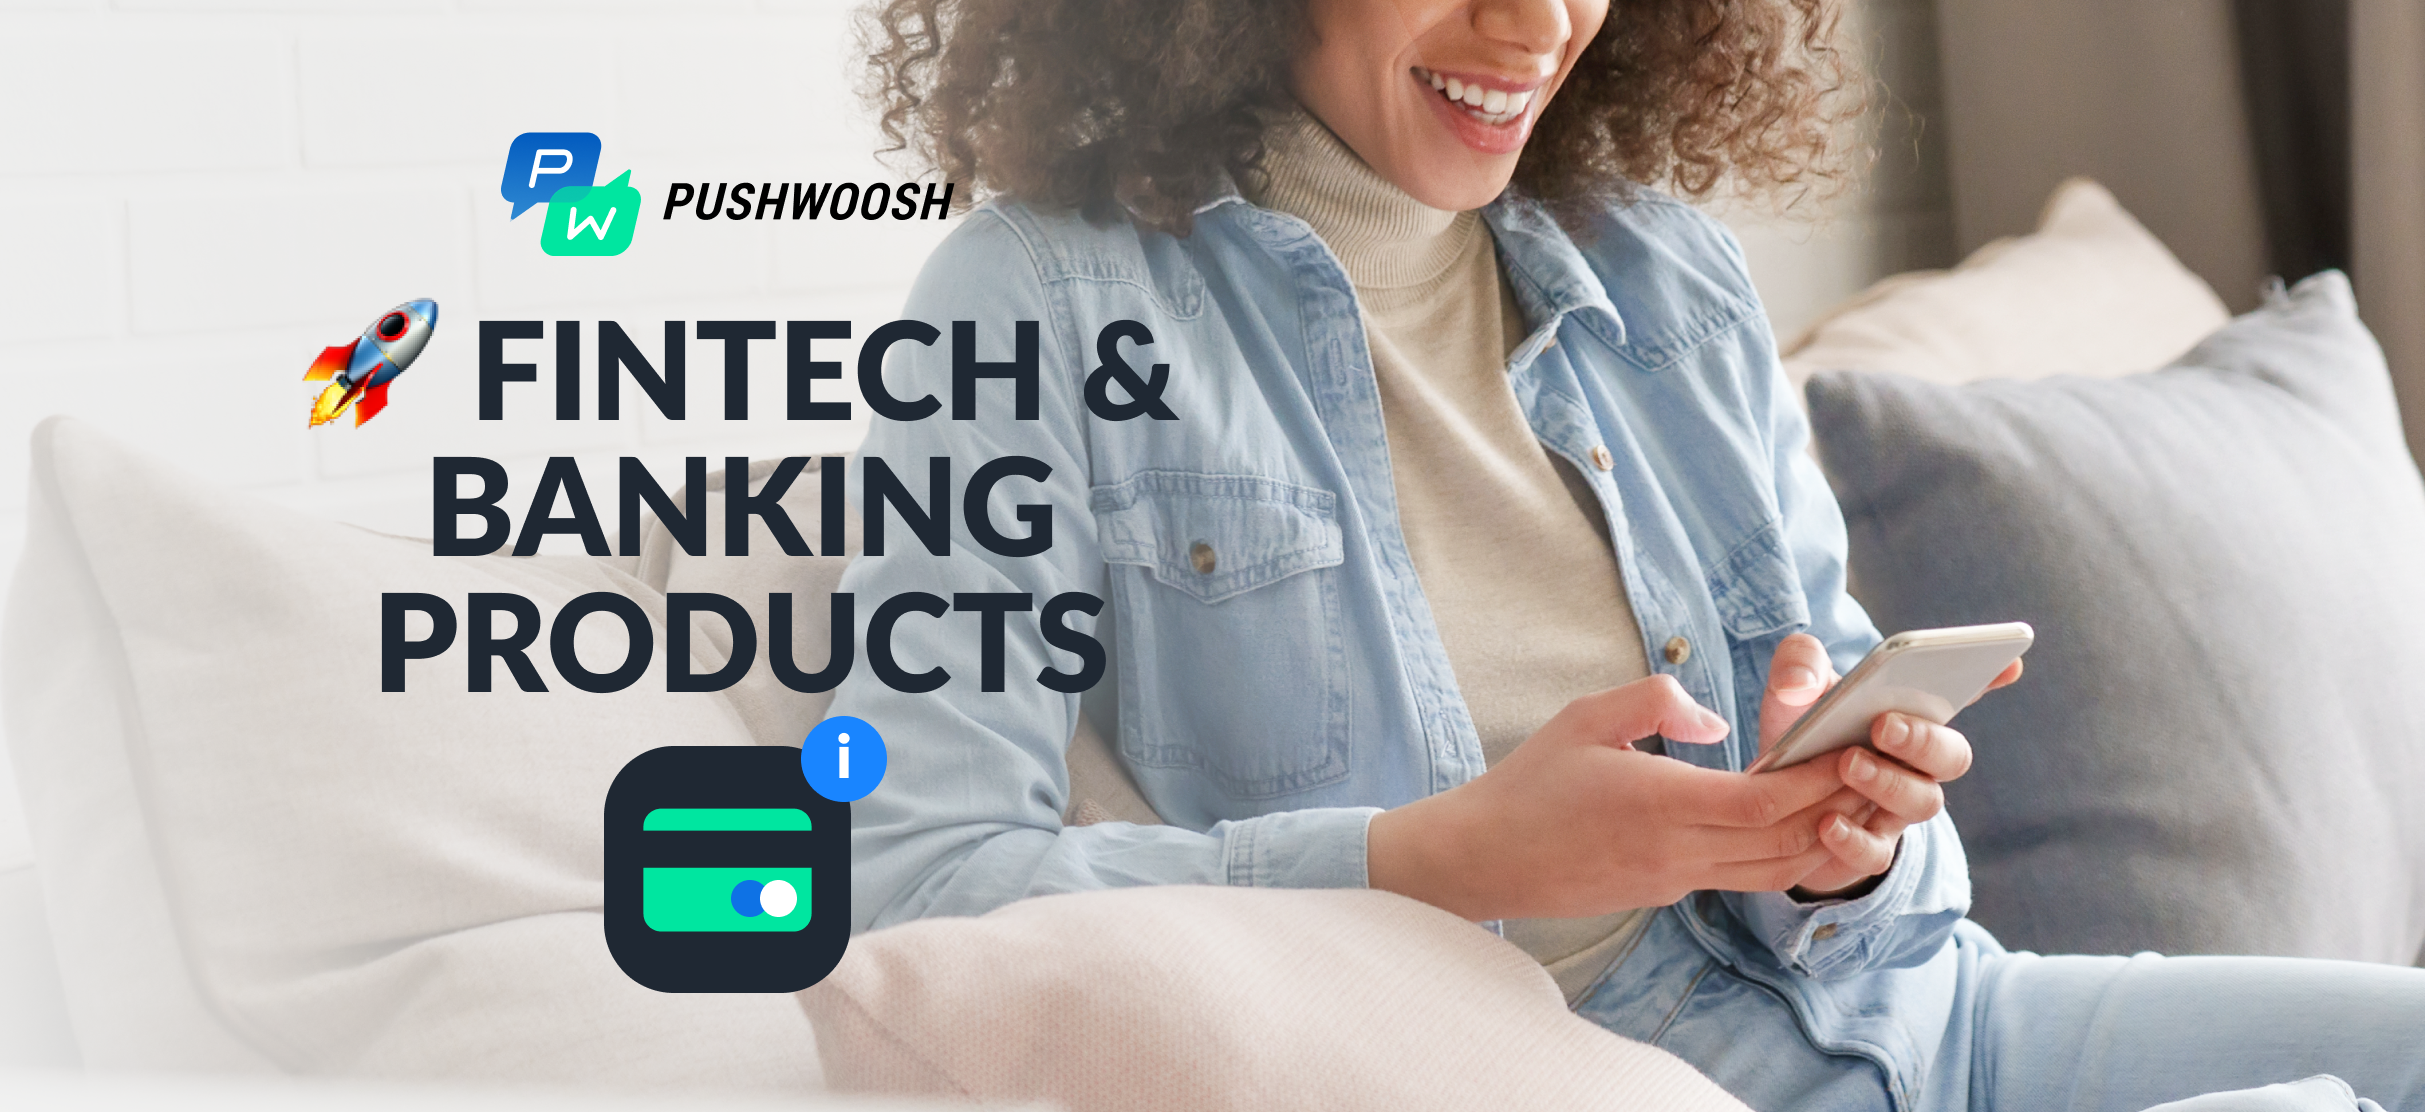 How to Increase Fintech & Banking Products Usage with App Messaging